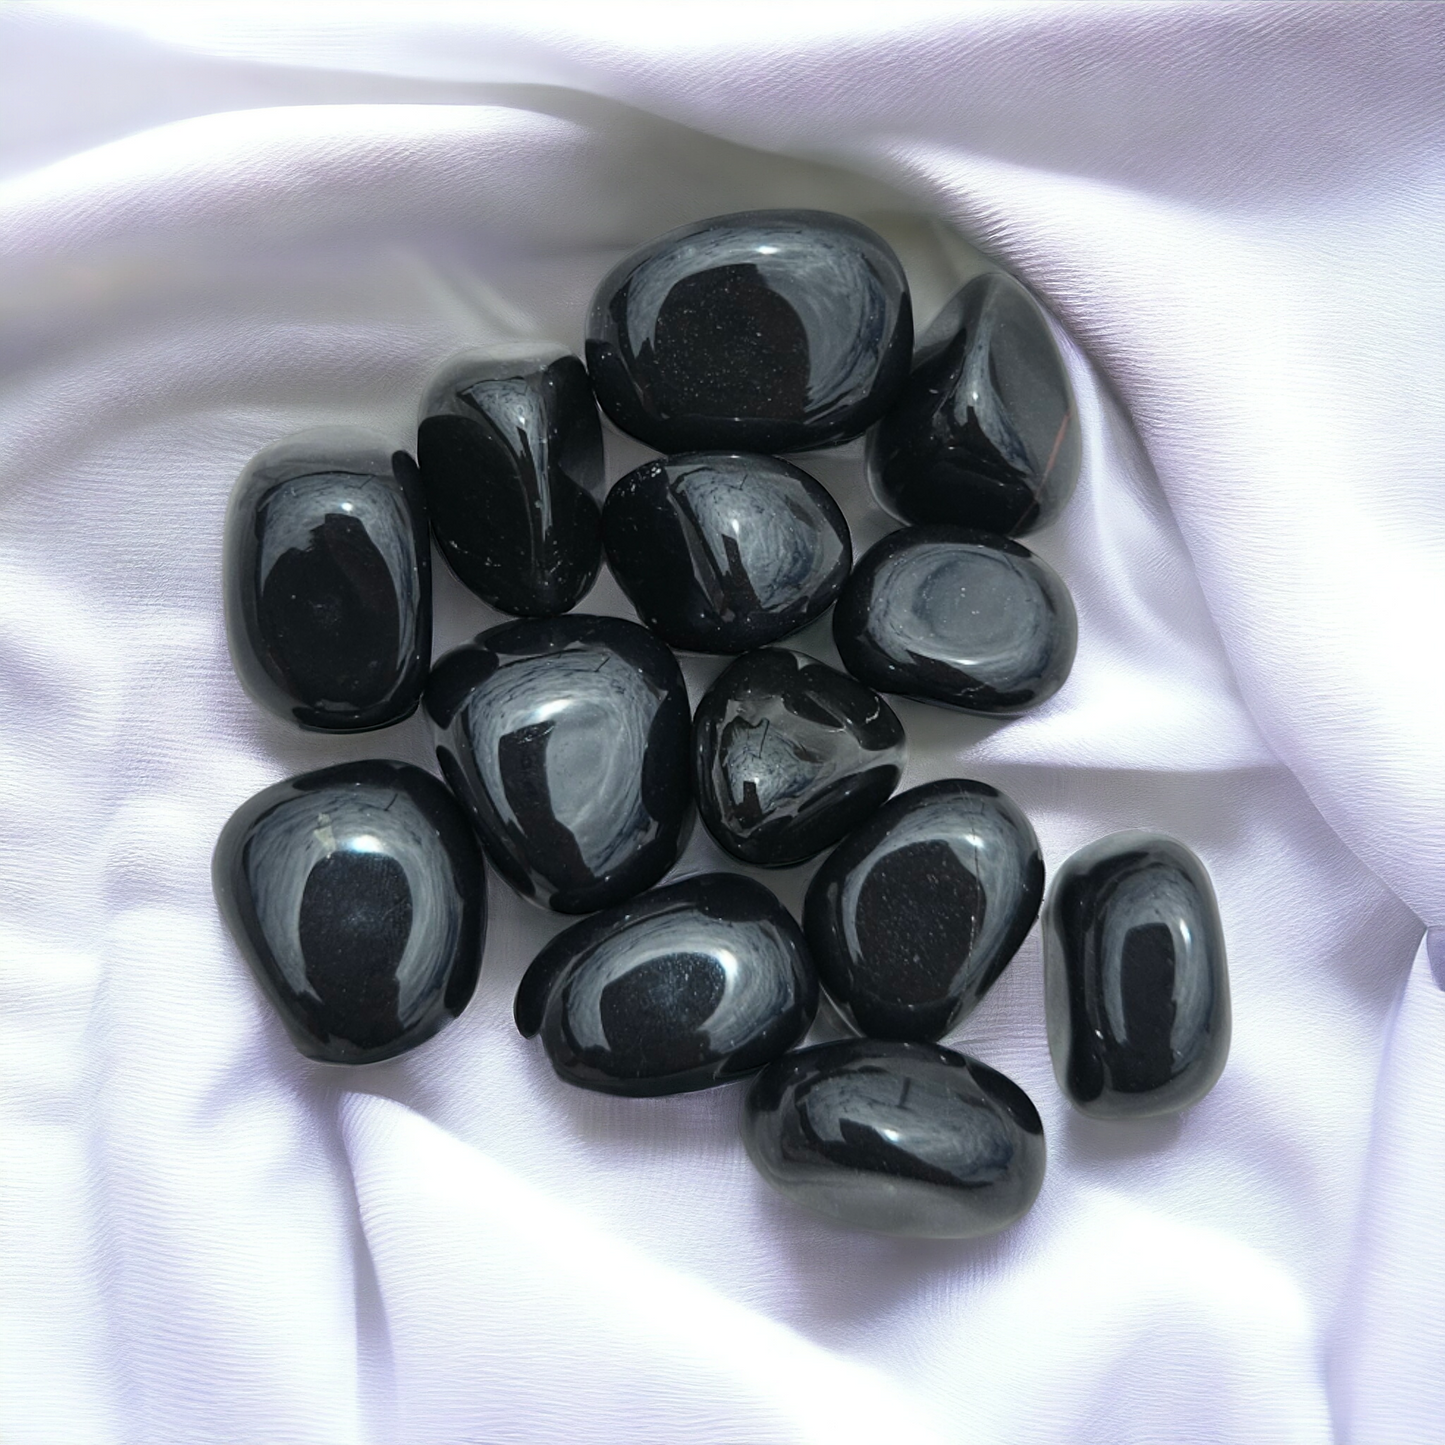 Black onyx crystal for protection sold at crystal store near Sydney.